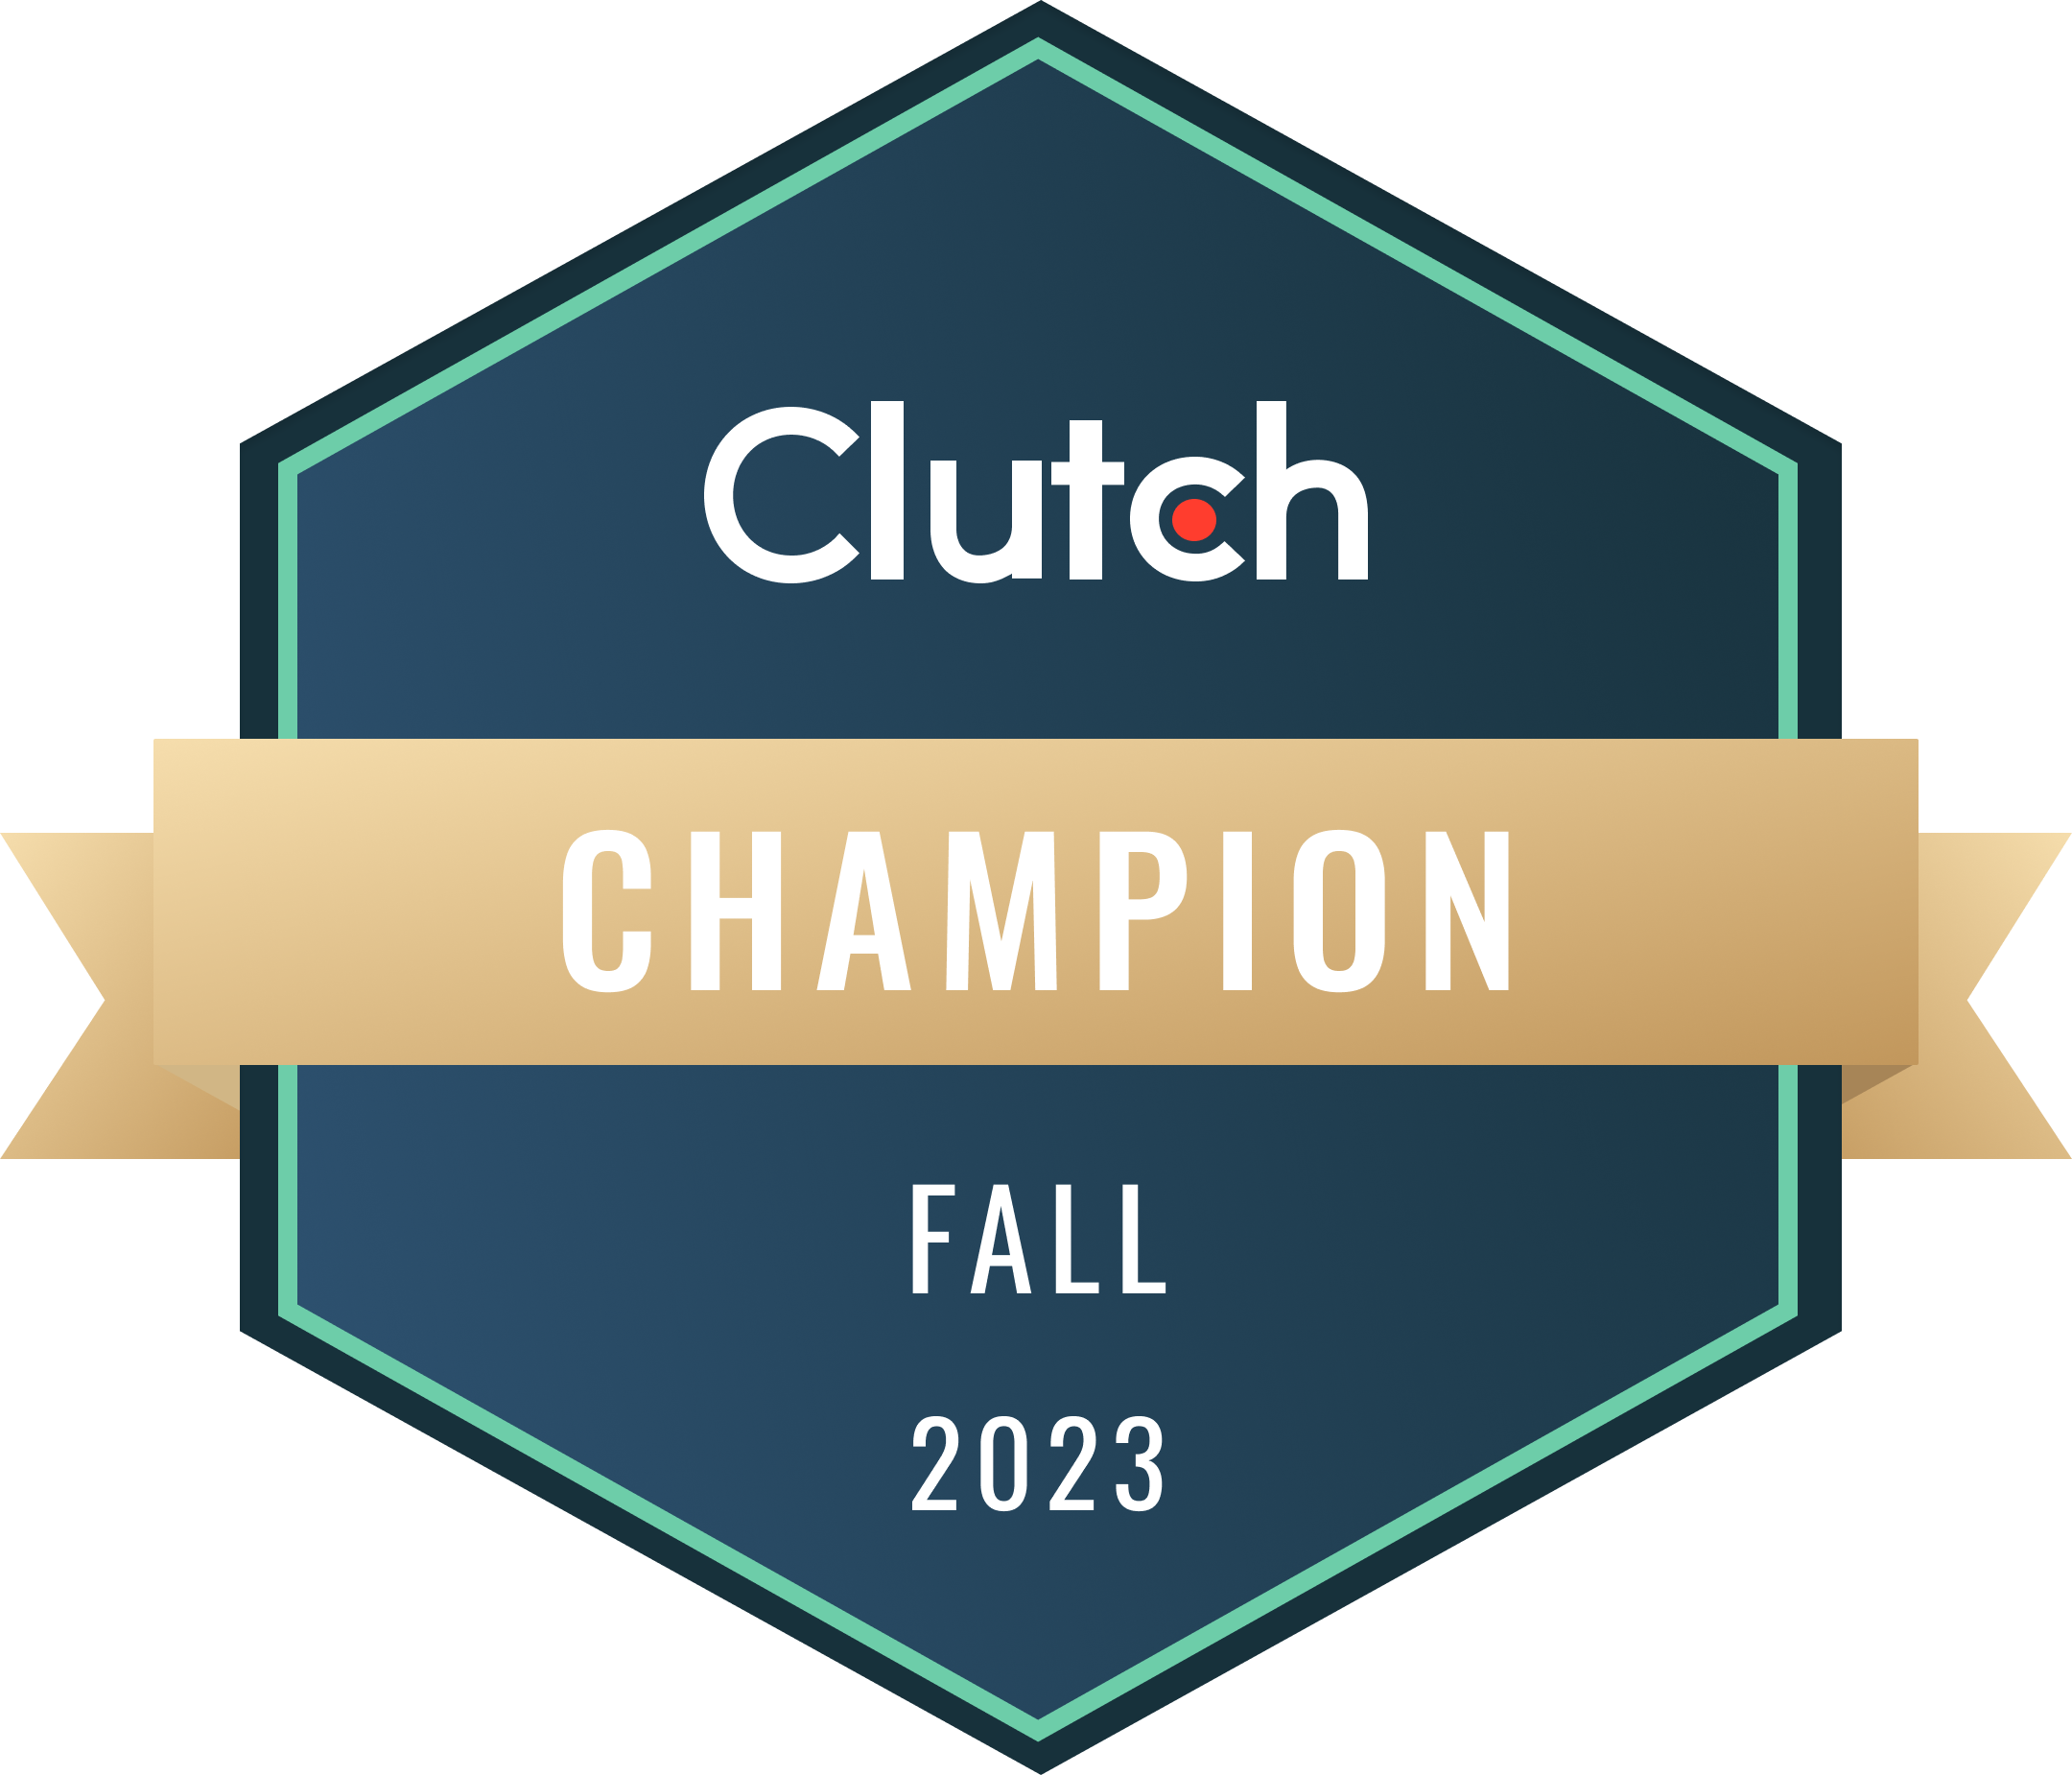 Virtual Sales Limited Honoured as a Clutch Champion for 2023